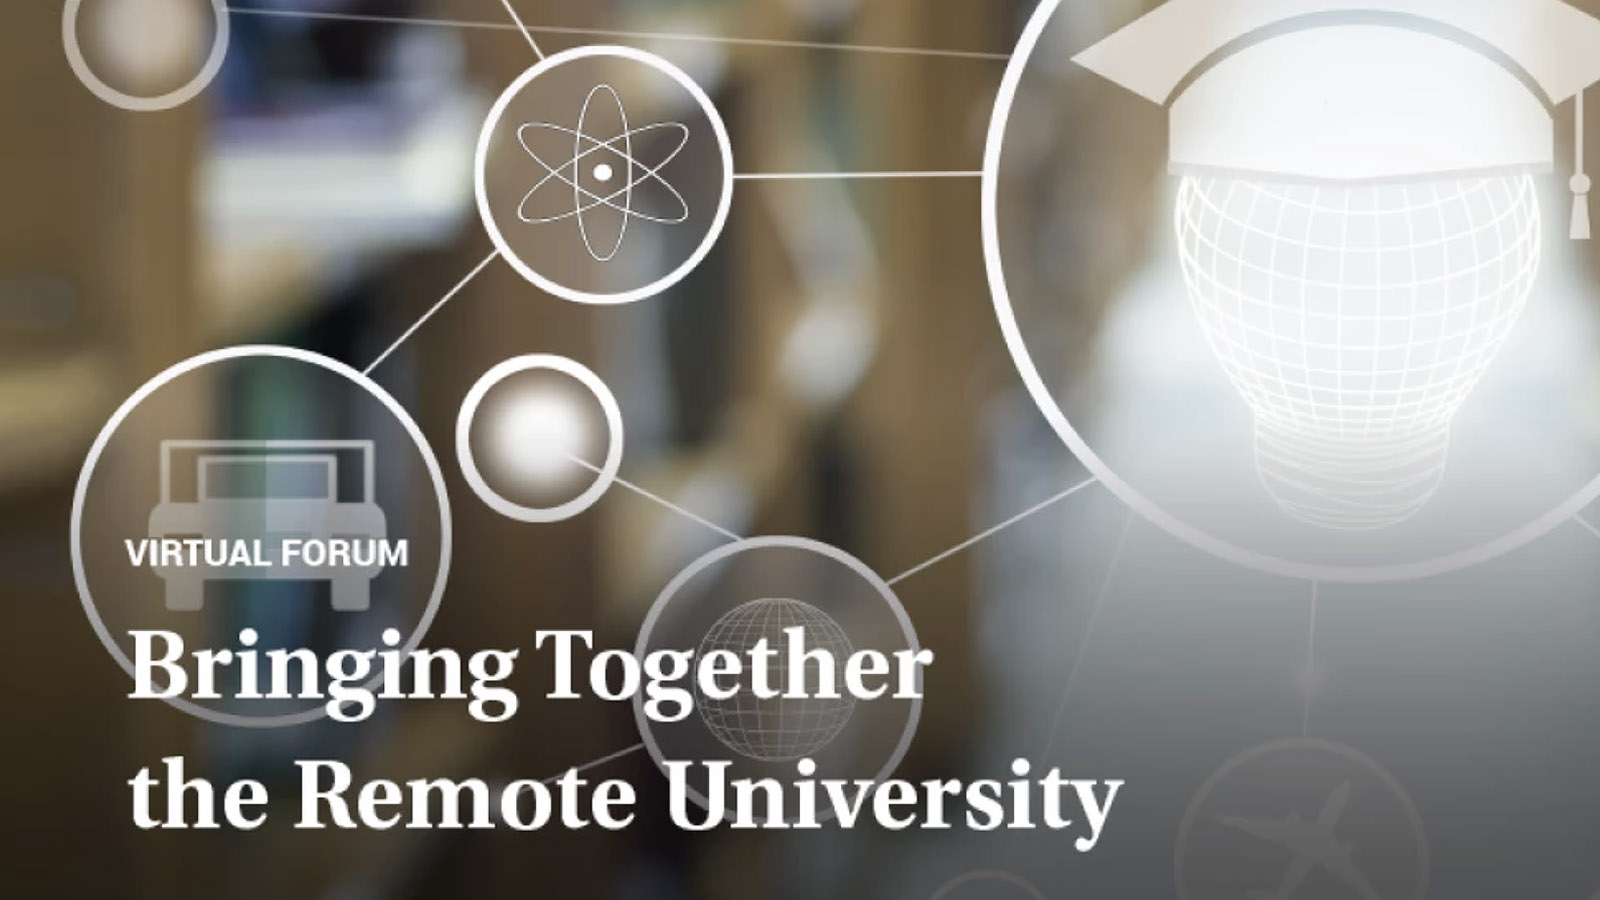 CIO Dee Childs discusses 'Bringing Together the Remote University' with Chronicle of Higher Education